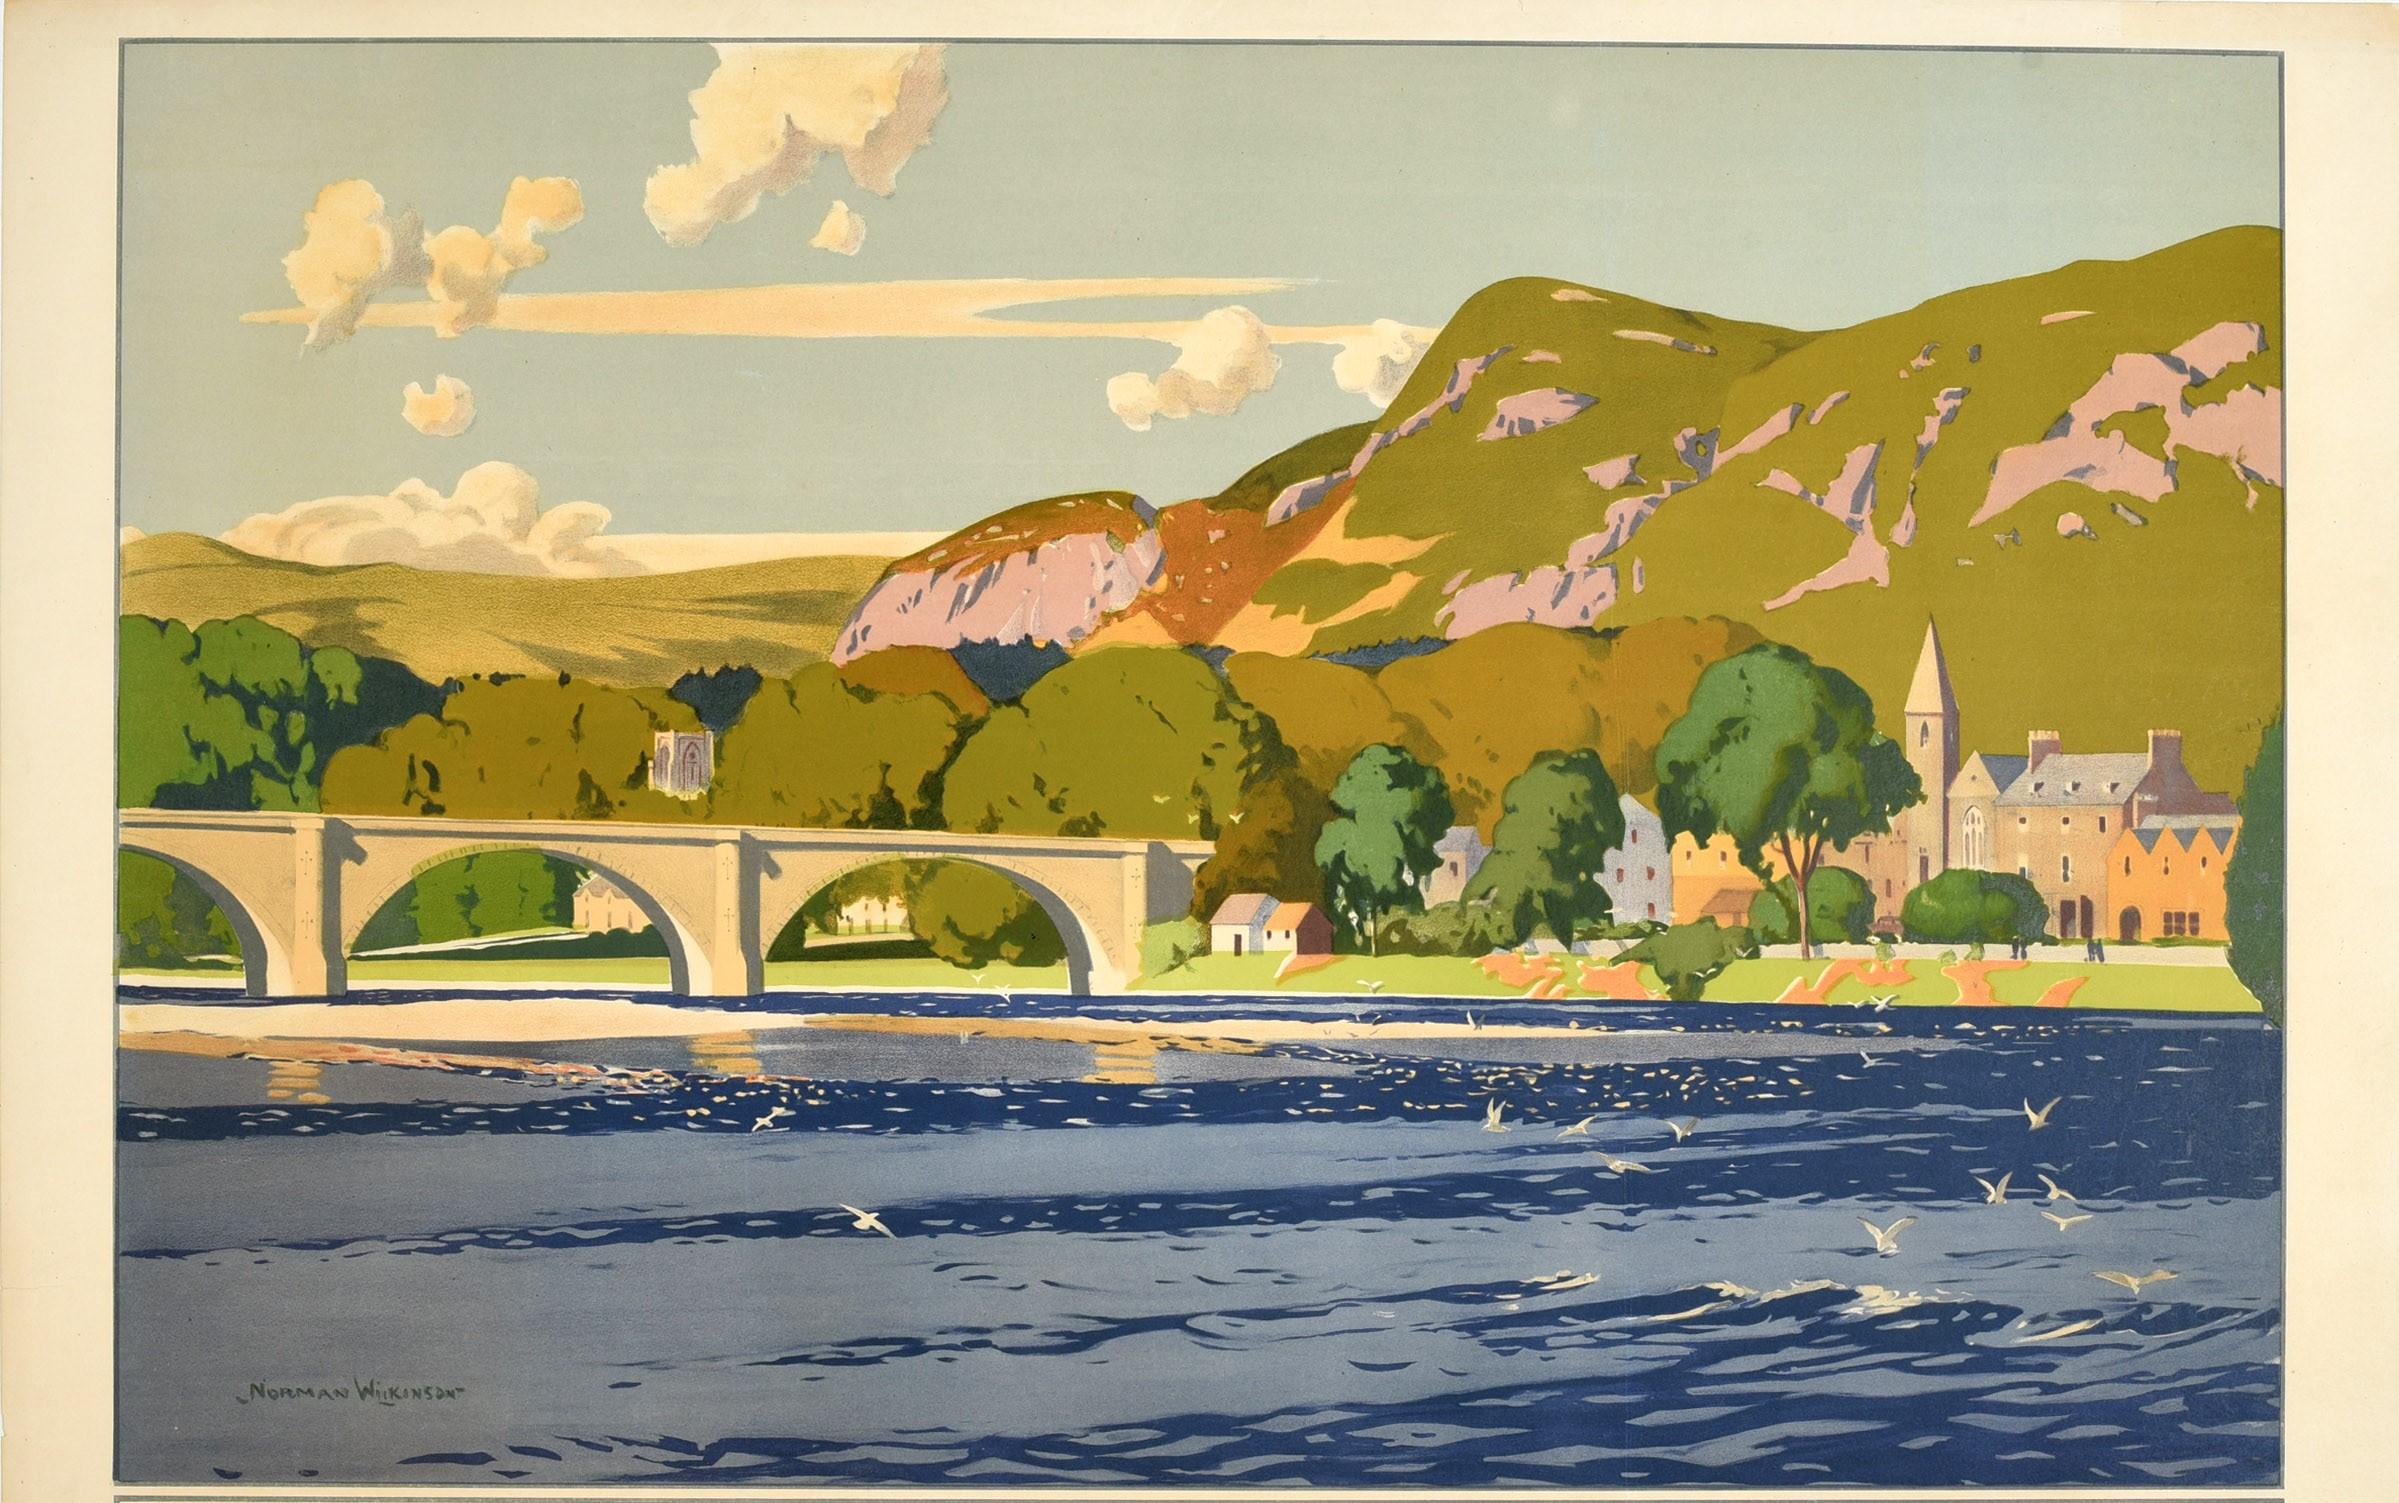 Original vintage travel poster issued by the London, Midland and Scottish Railway LMS and London North Eastern Railway LNER - Dunkeld Cathedral River Tay It's quicker by rail - featuring artwork by the notable British artist and illustrator Norman